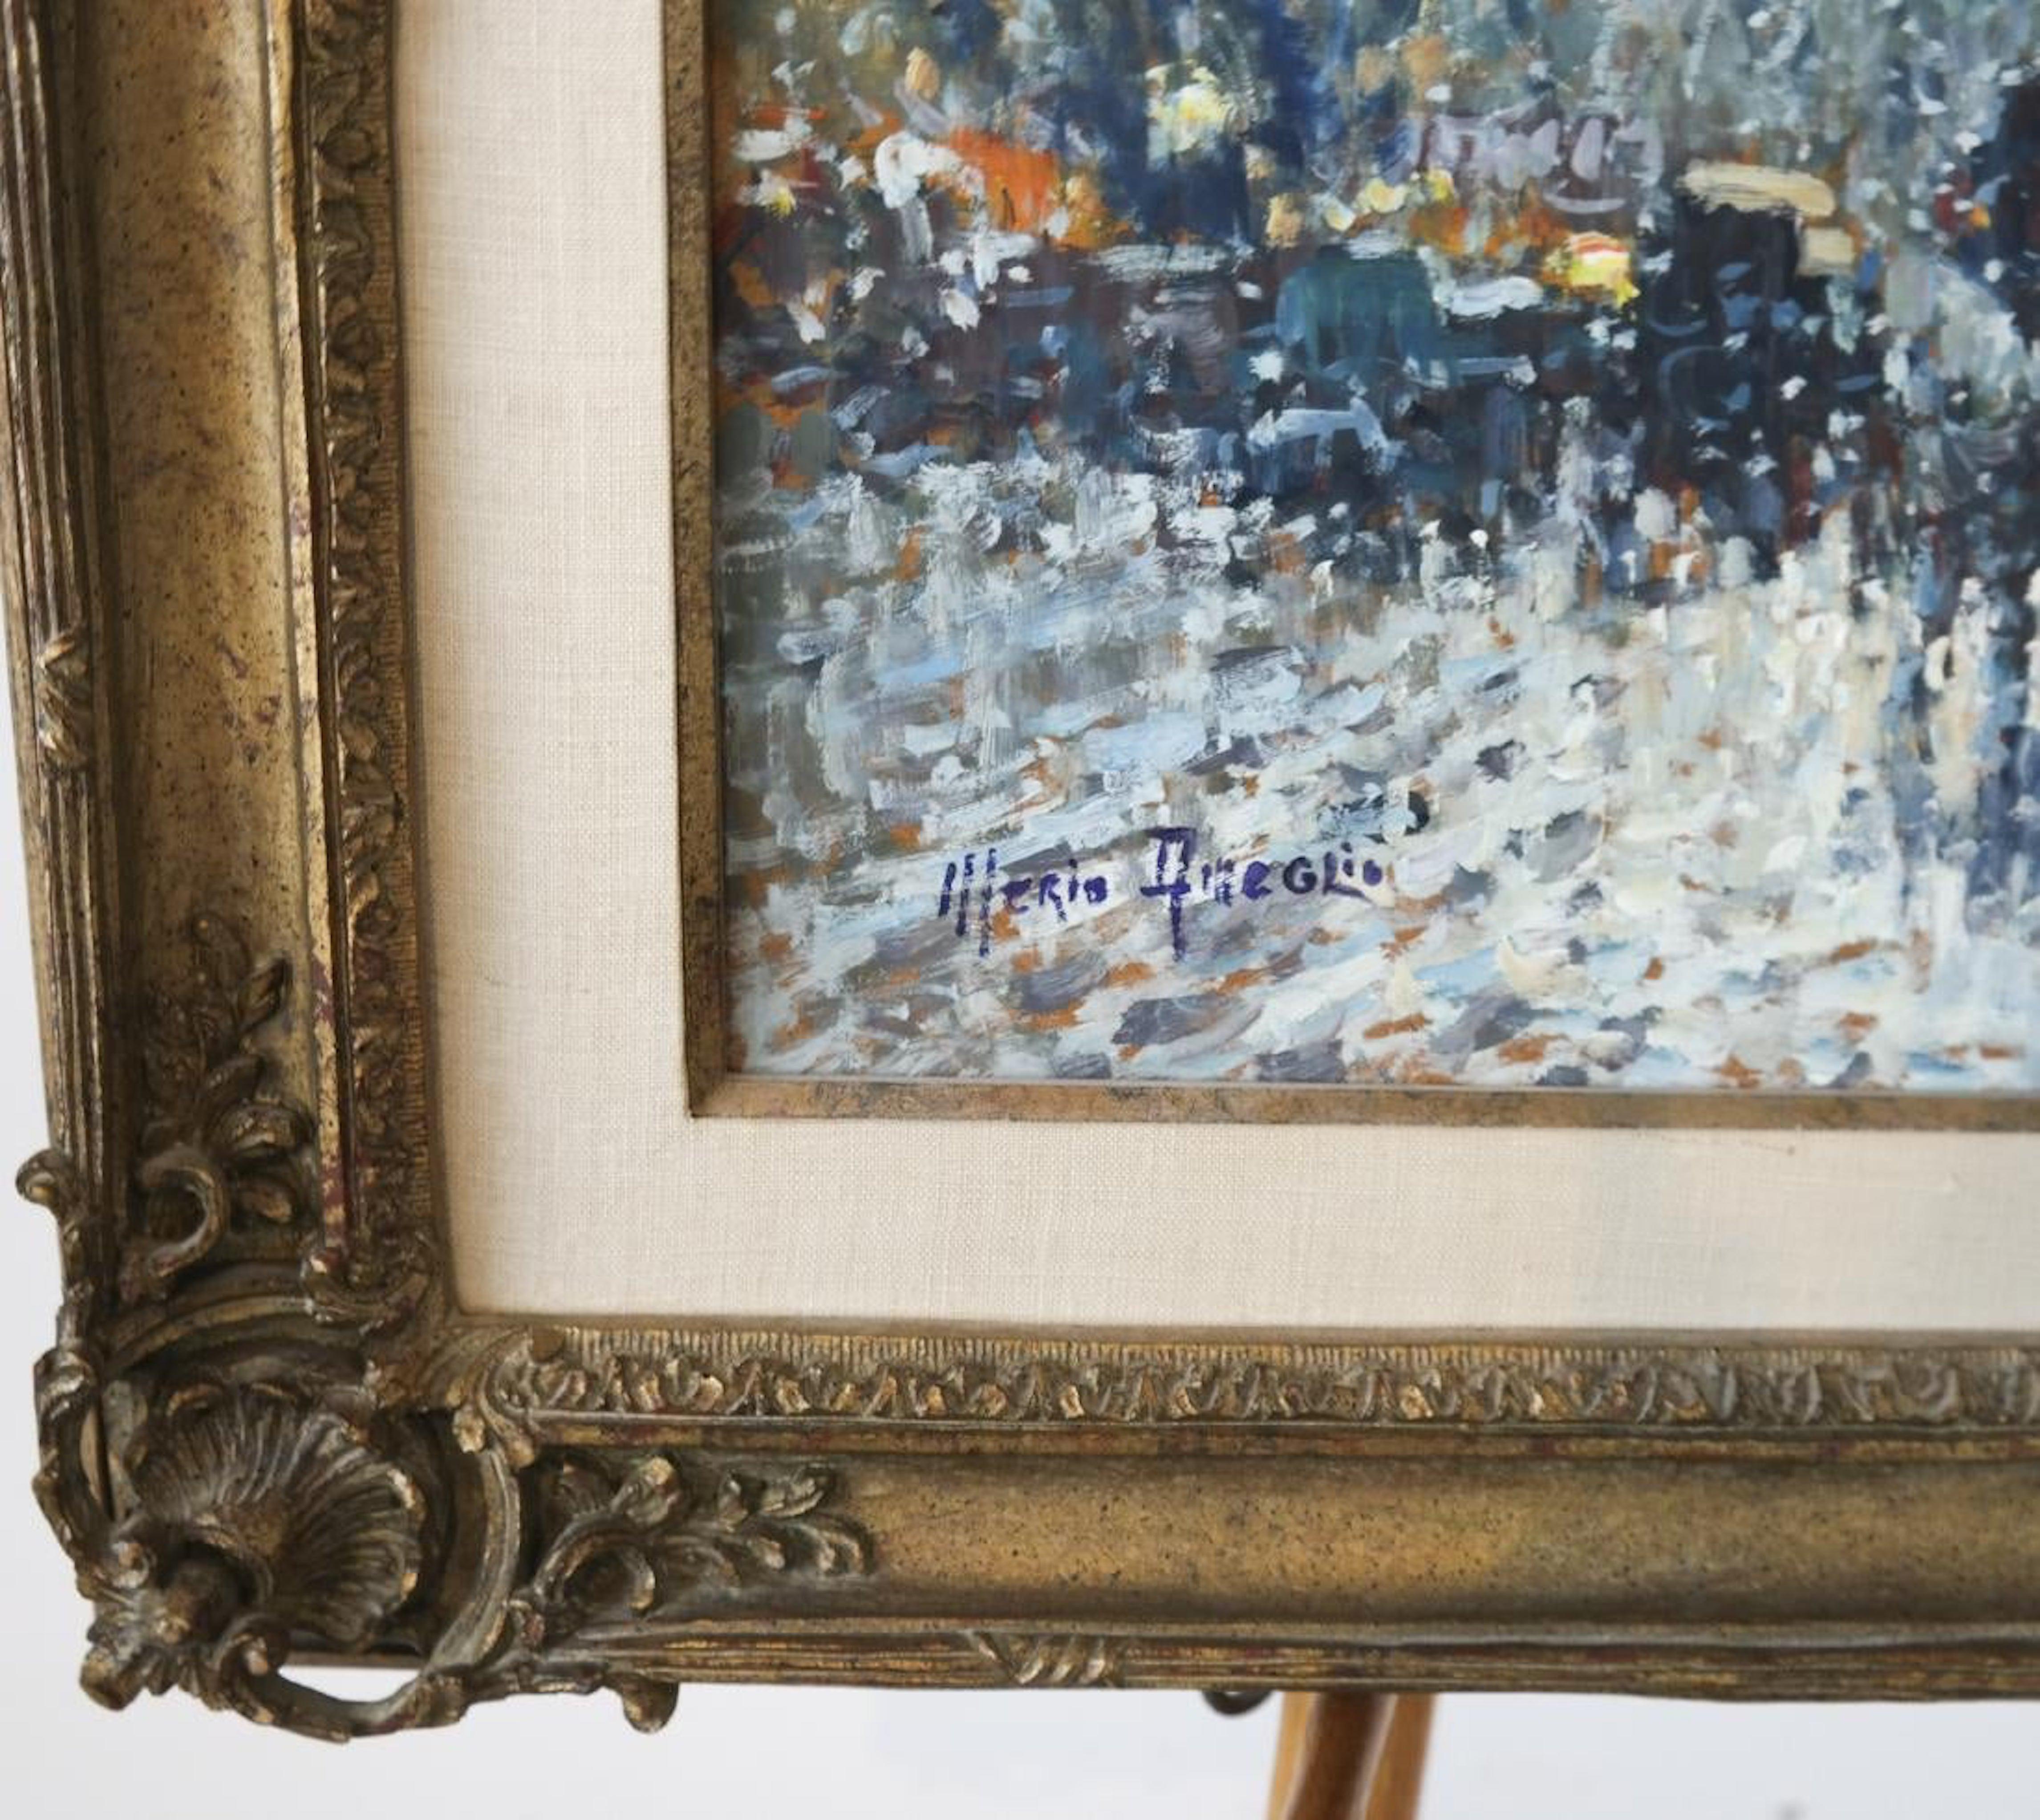 Oil on board, signed lower left. Painting measures 18 x 21 inches; Frame: 26 1/2 x 31 inches.

Merio noted impressionist painter primarily known for his landscapes and cityscapes, seascapes and harbor views from his extensive travels throughout